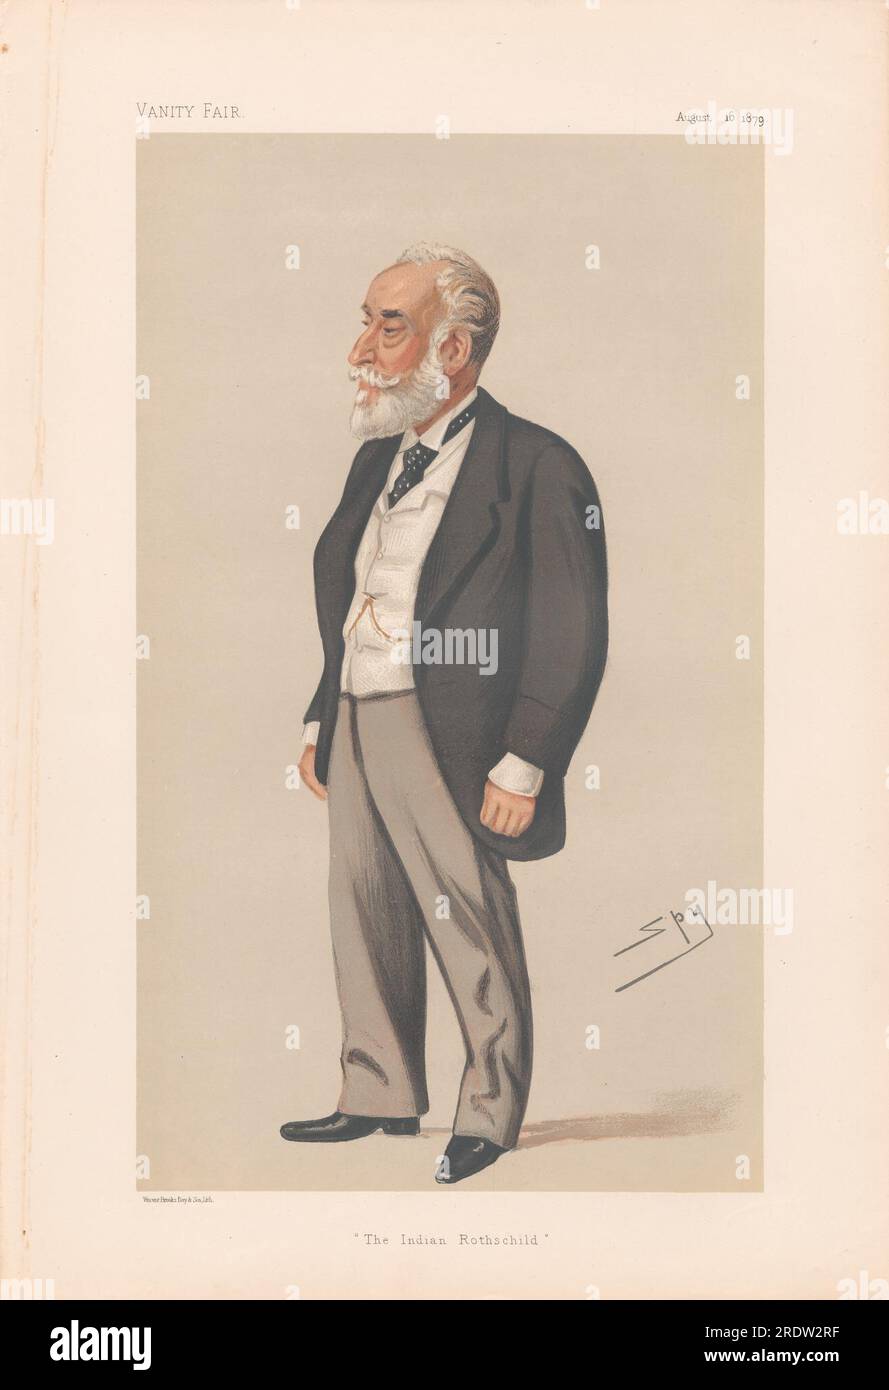 Vanity Fair - Businessmen and Empire Builders. 'The Indian Rothchild'. Sir Albert Abdallah David Sassoon, C.S.I. - 16 August 1879 1879 by Leslie Ward Stock Photo